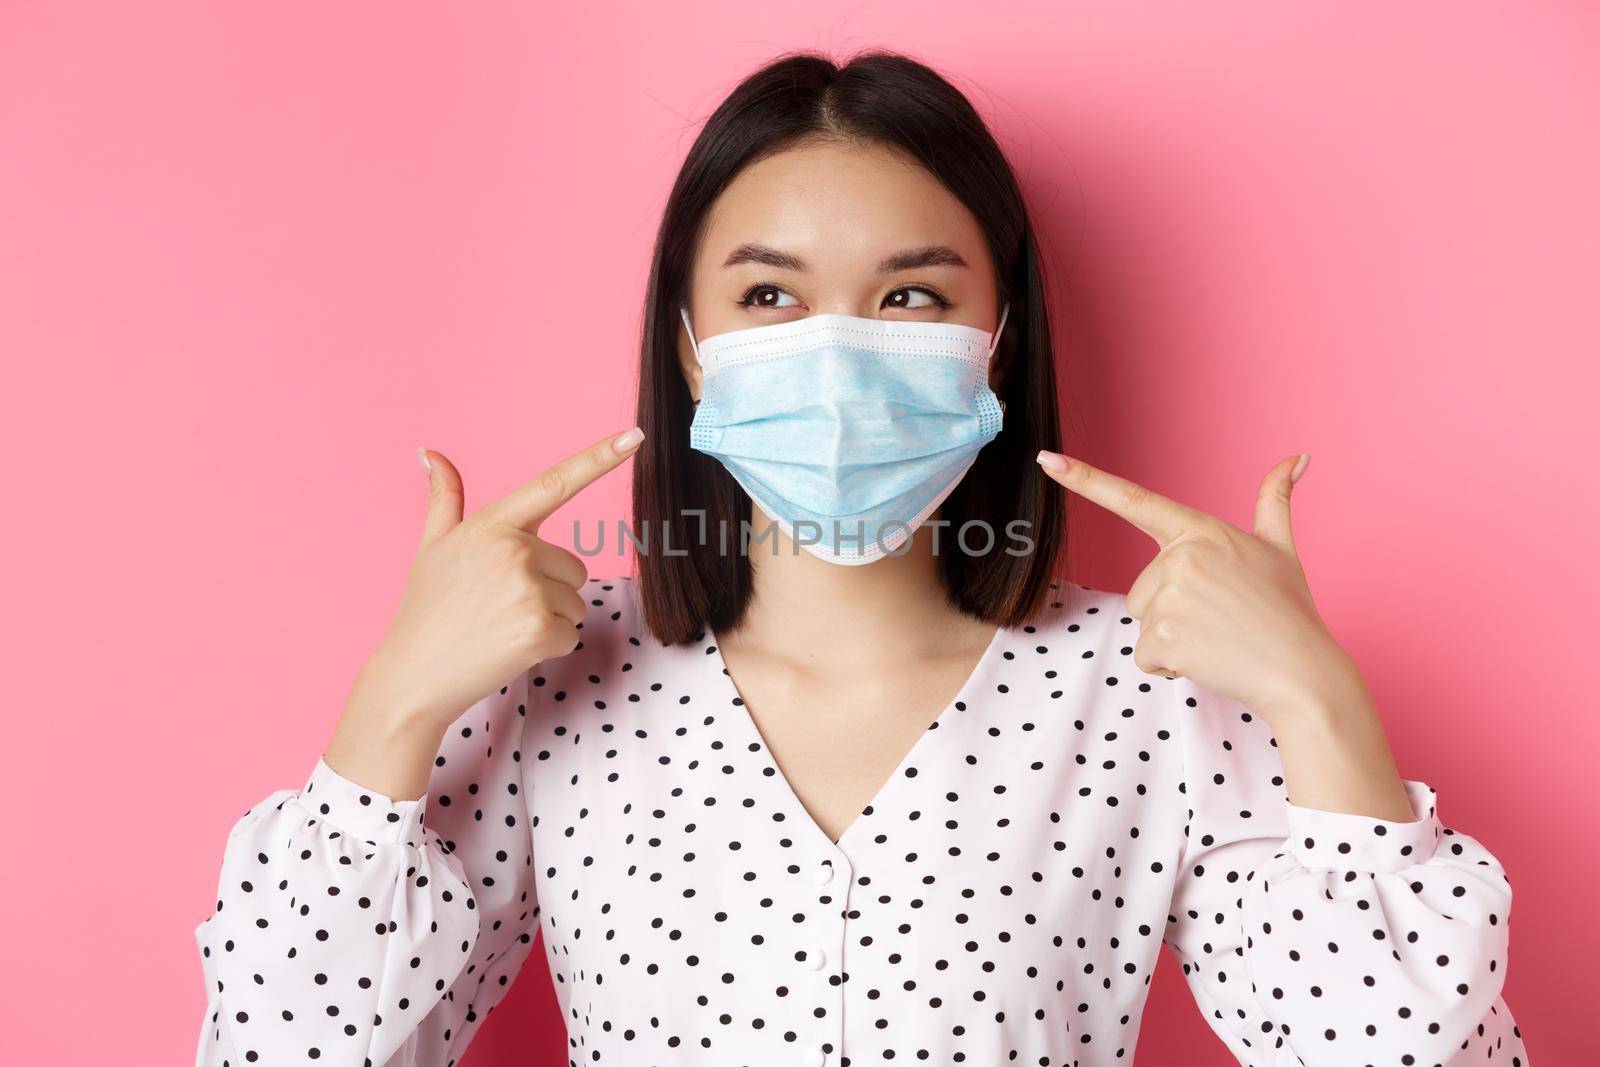 Covid-19, pandemic and lifestyle concept. Kawaii asian girl pointing fingers at her face mask, wearing preventive measures from coronavirus, smiling with eyes, pink background.